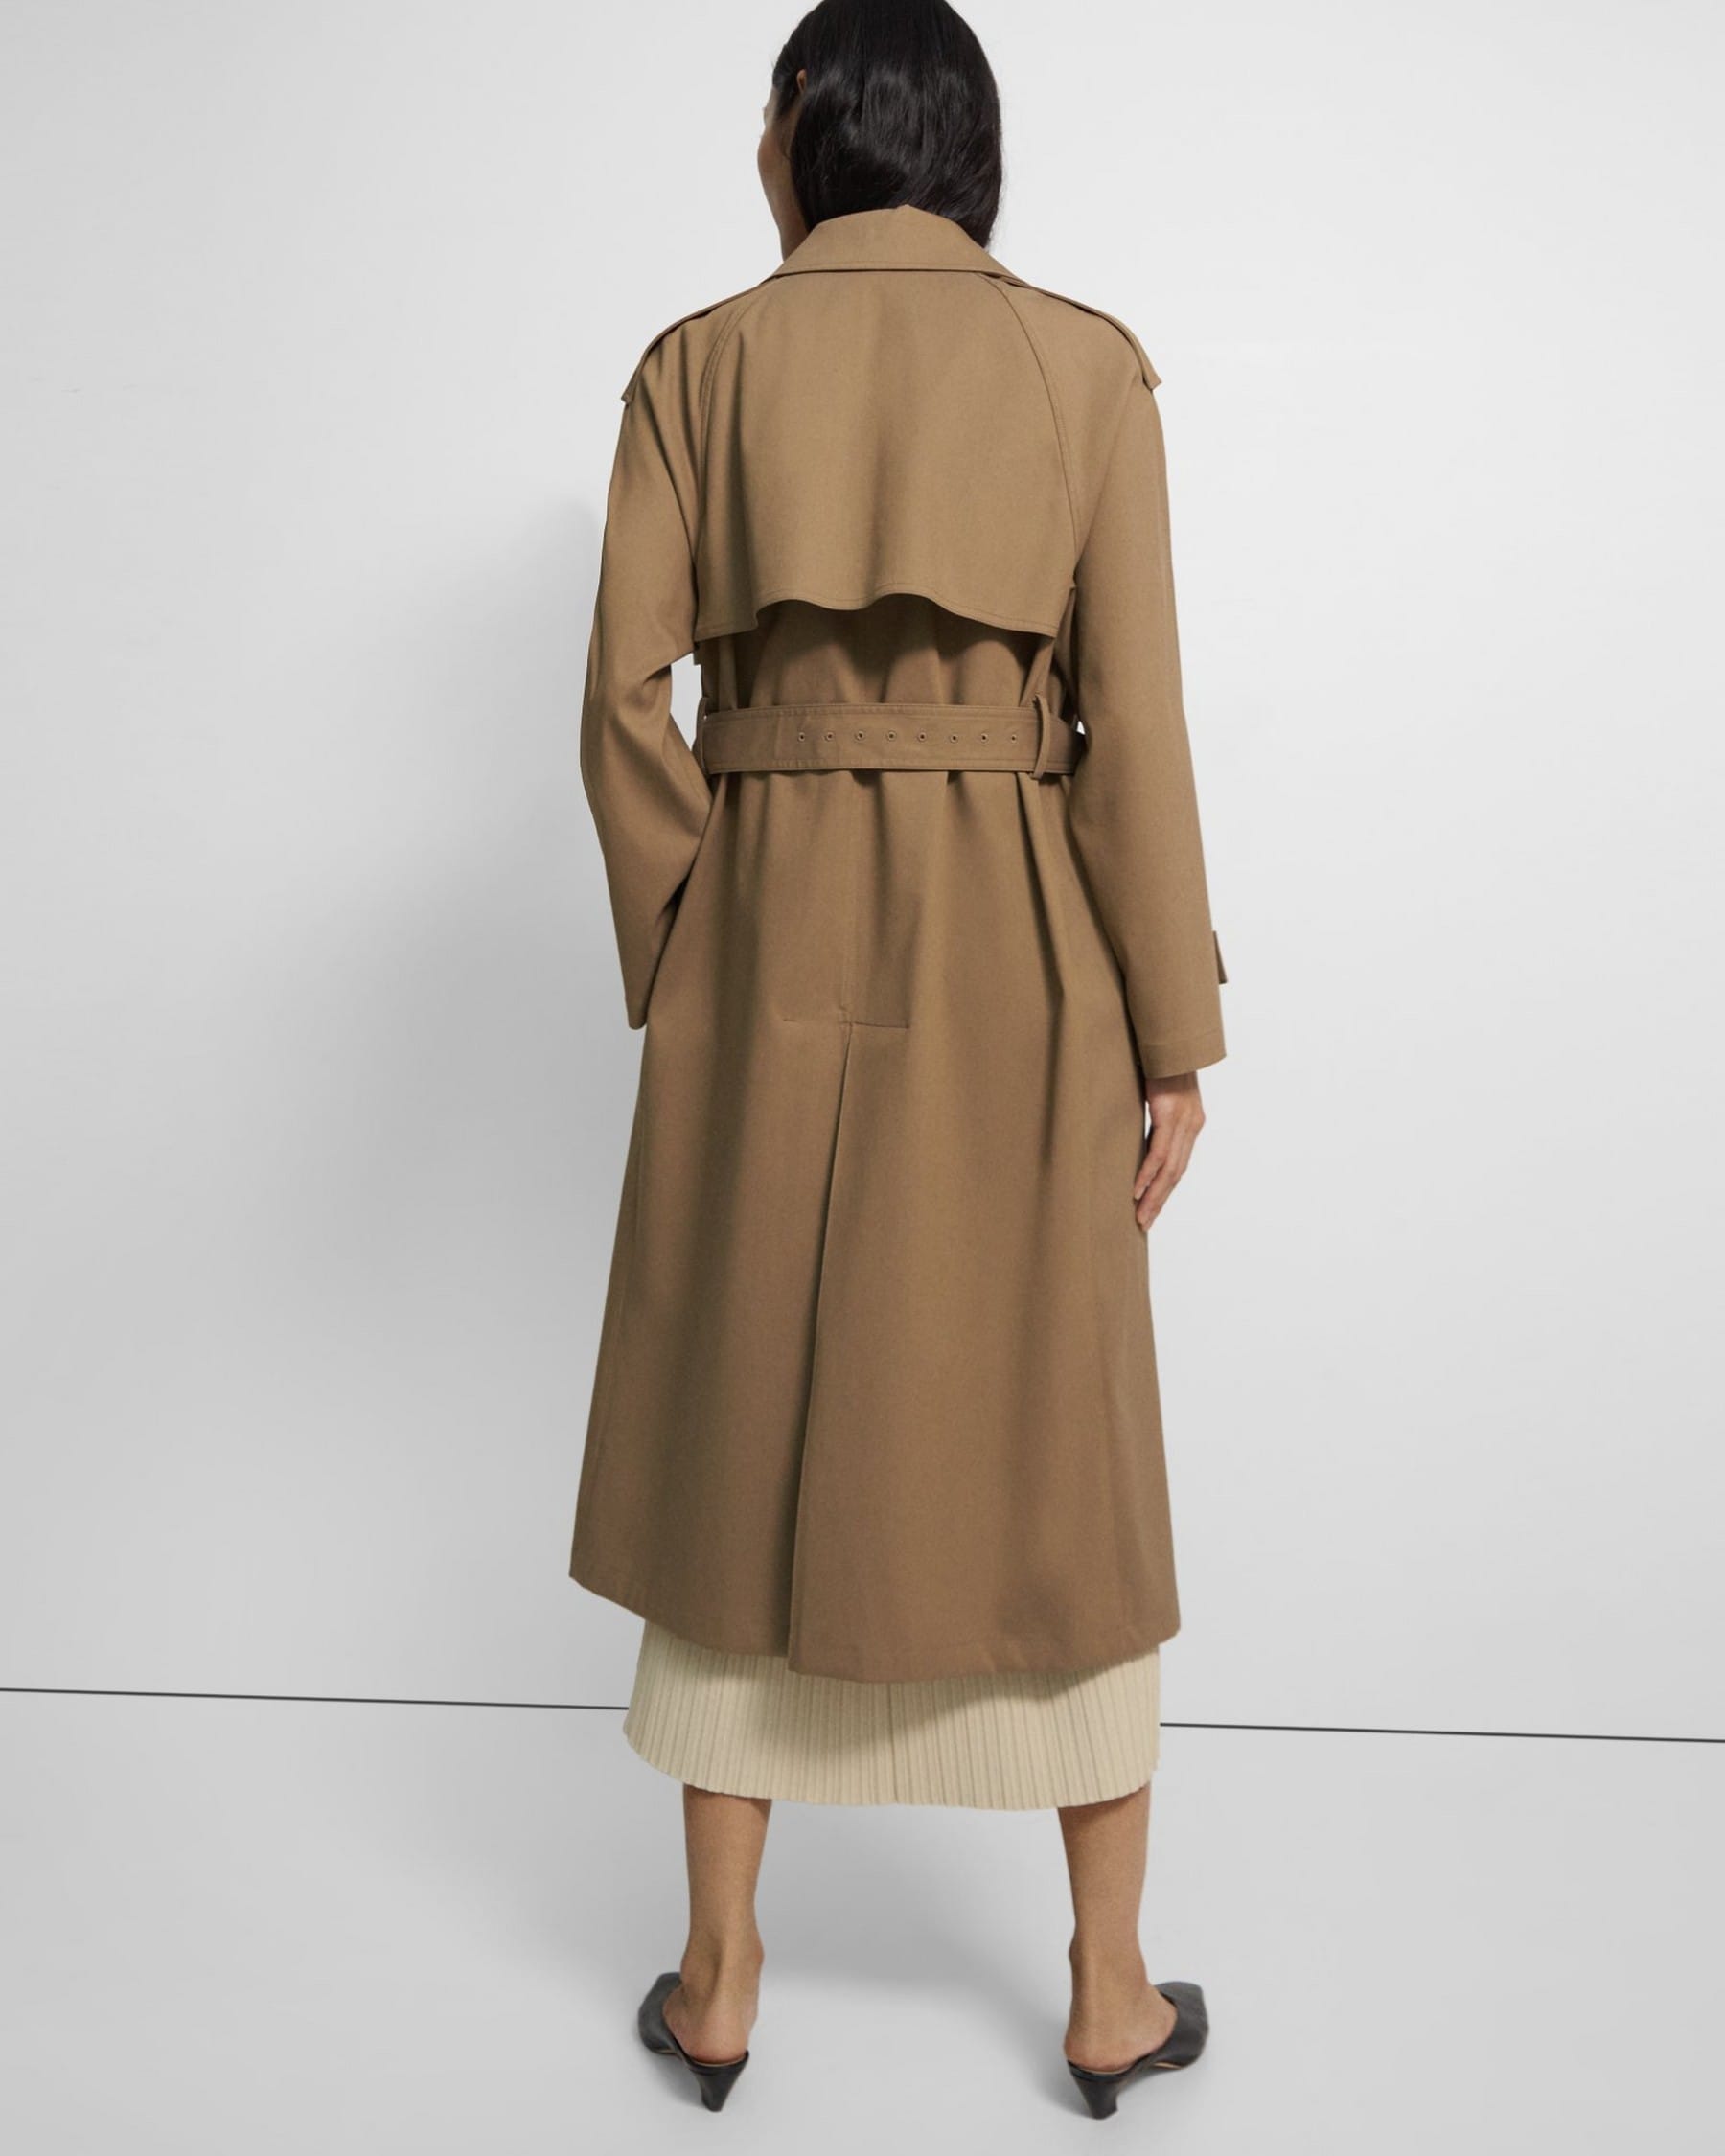 Breddegrad mentalitet frokost Technical Twill Belted Trench Coat | Theory